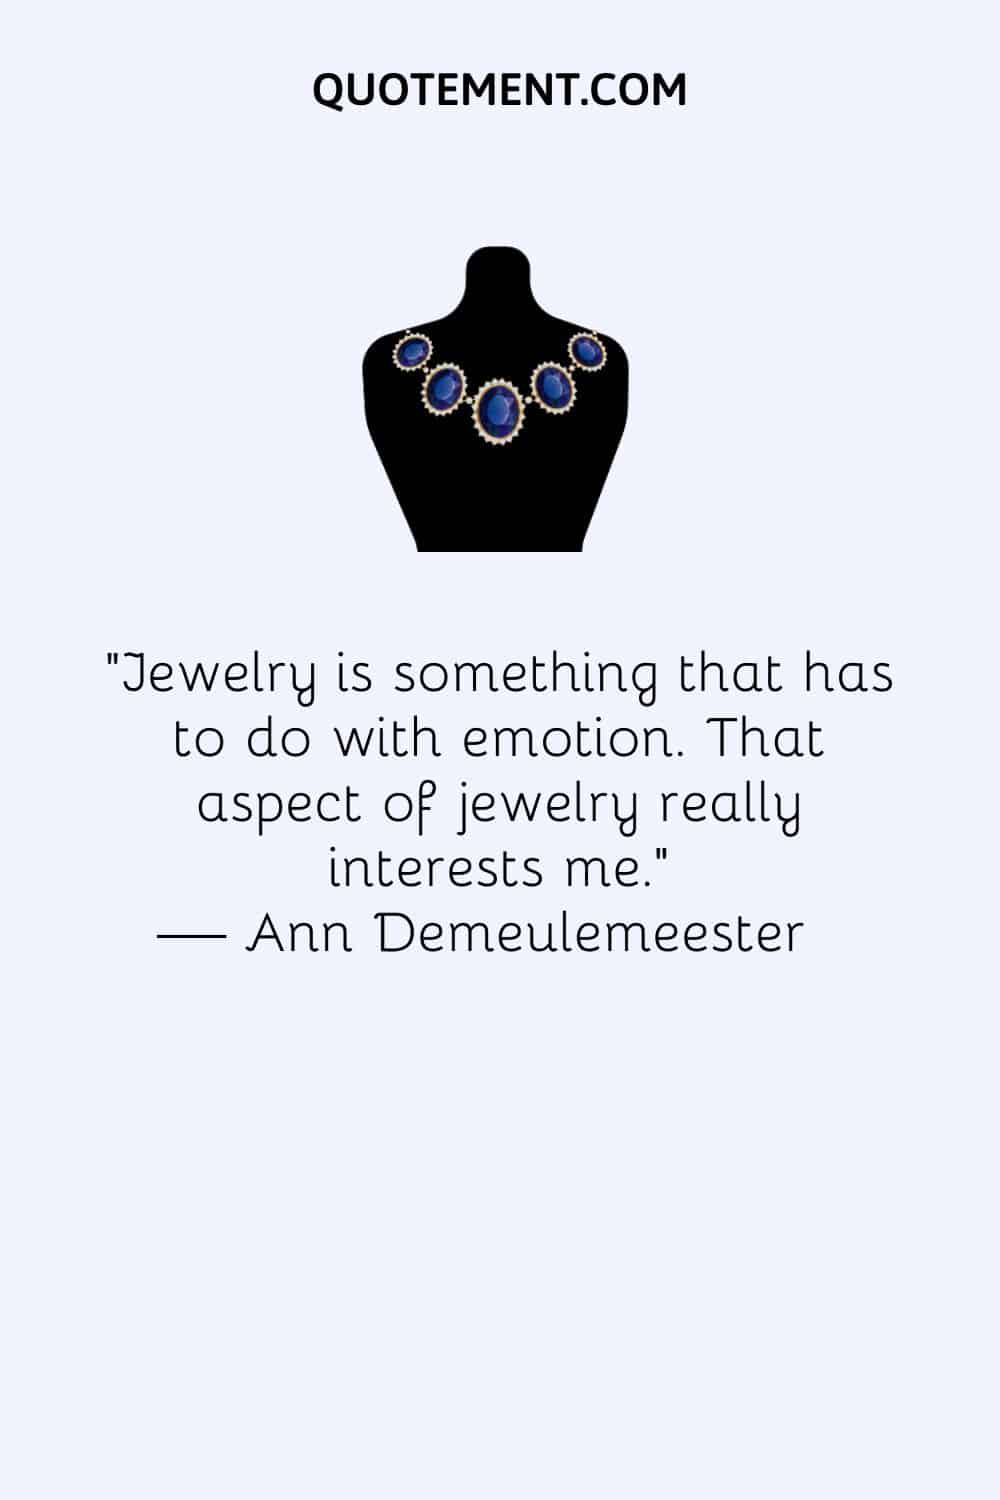 Jewelry is something that has to do with emotion. That aspect of jewelry really interests me